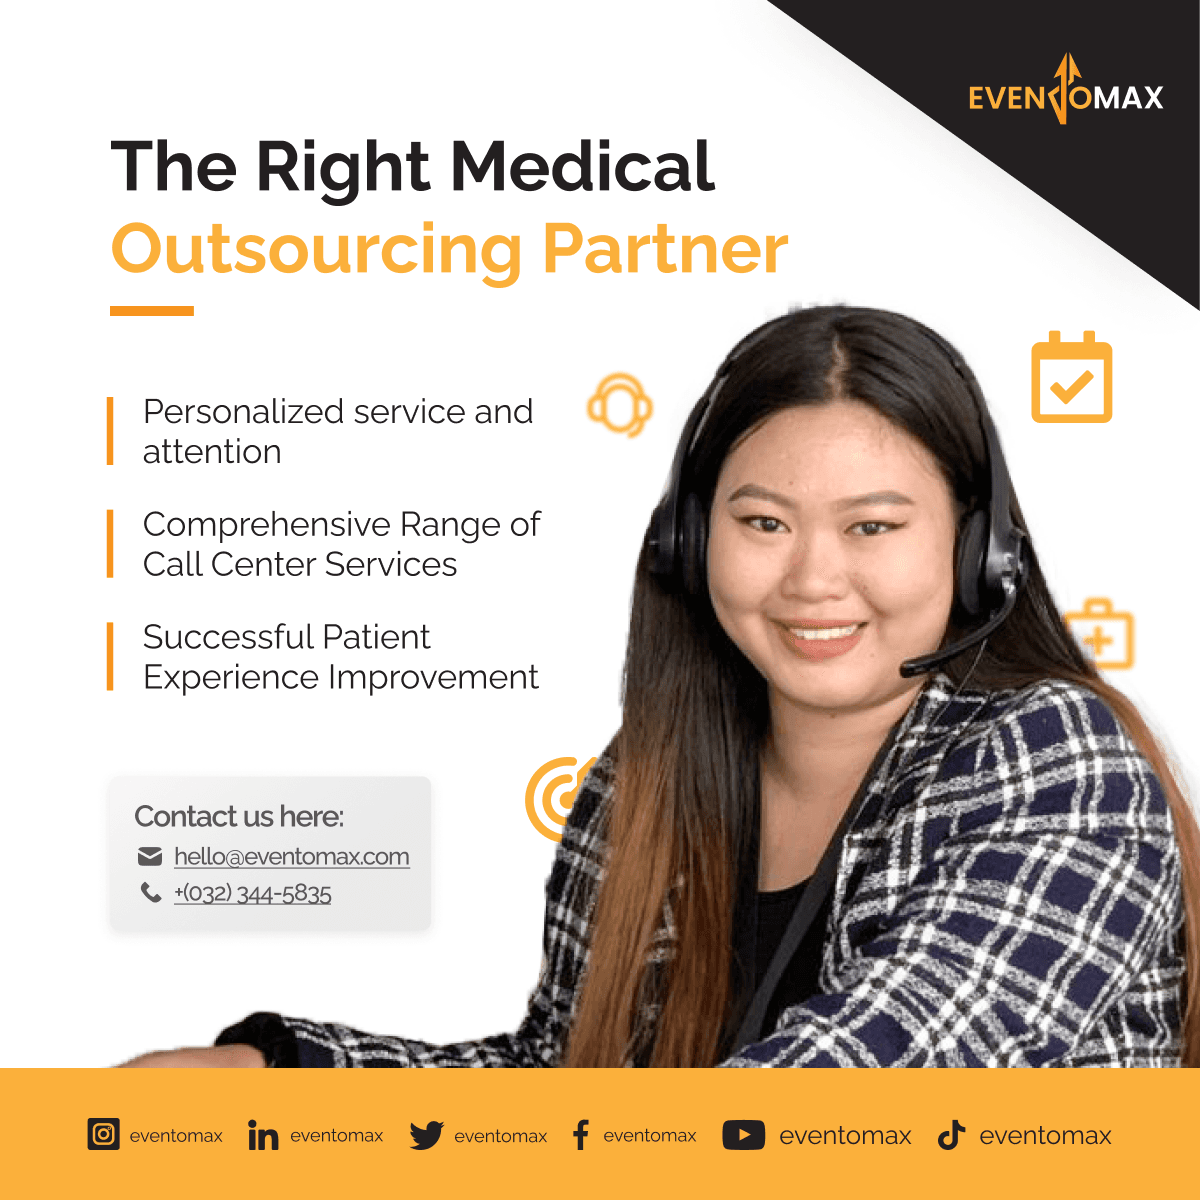 Choosing the Right Medical Outsourcing Partner